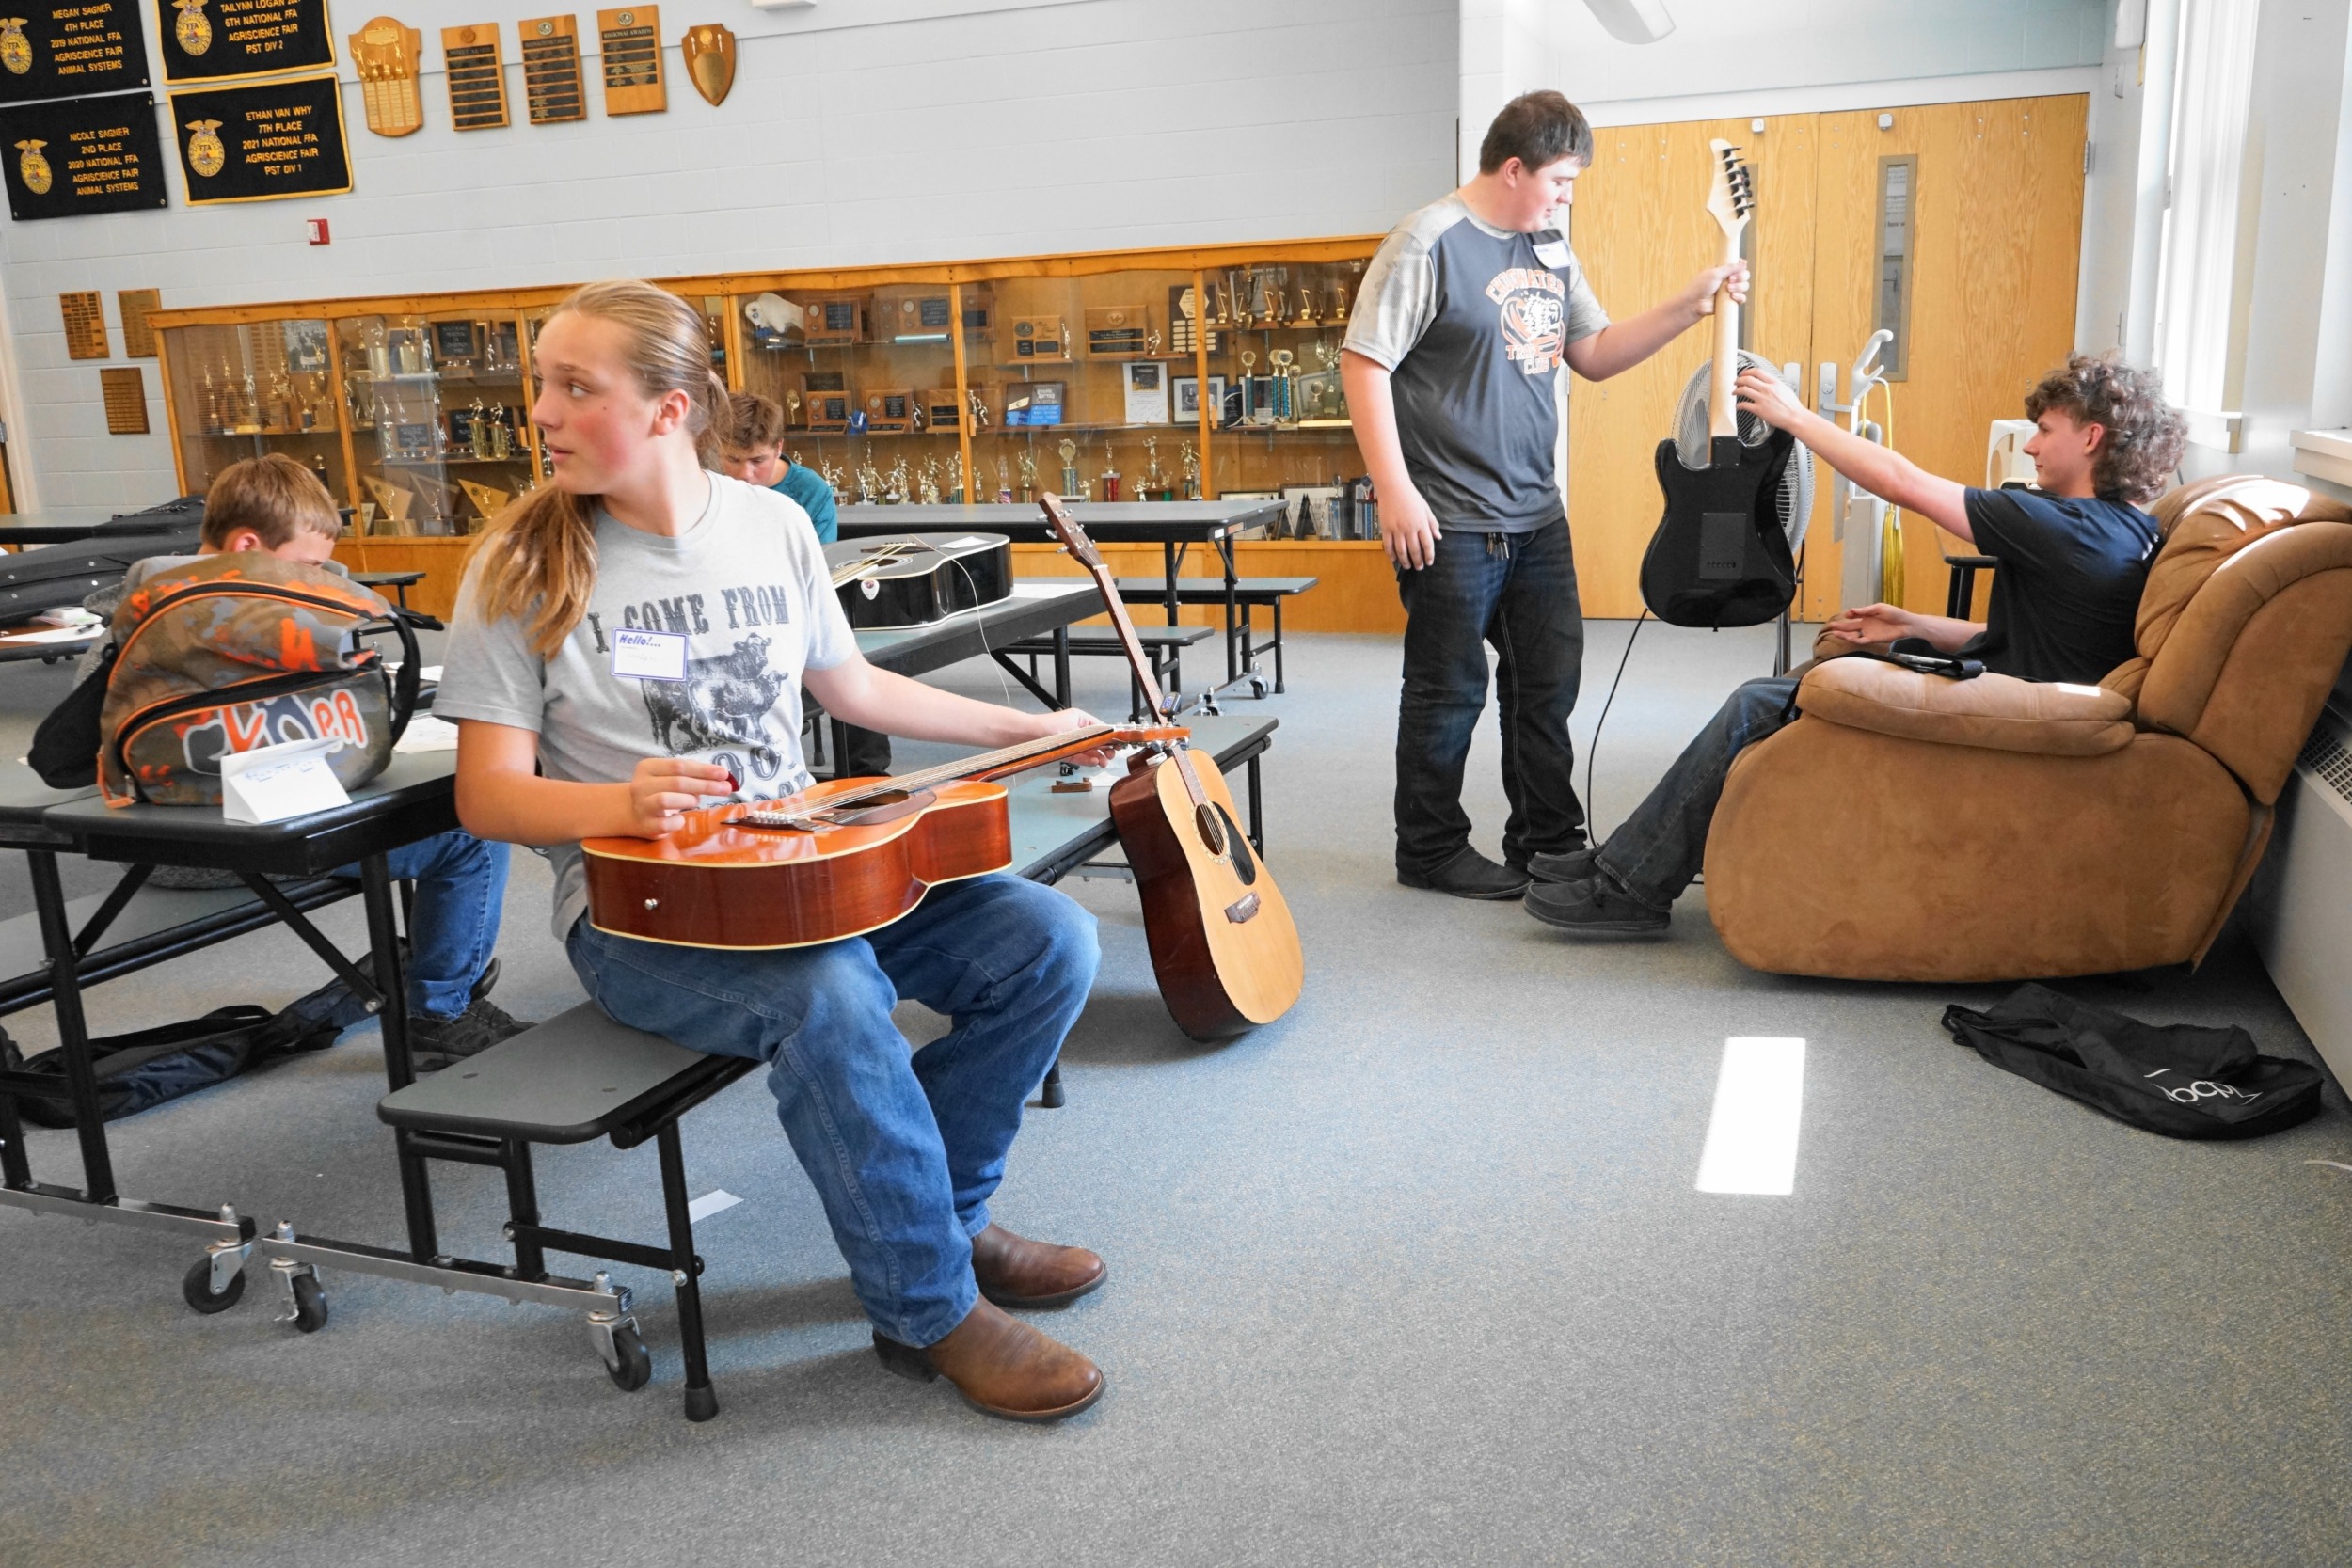 Chugwater, WY public school is now charter: students using guitars in a room with trophy cabinet in background